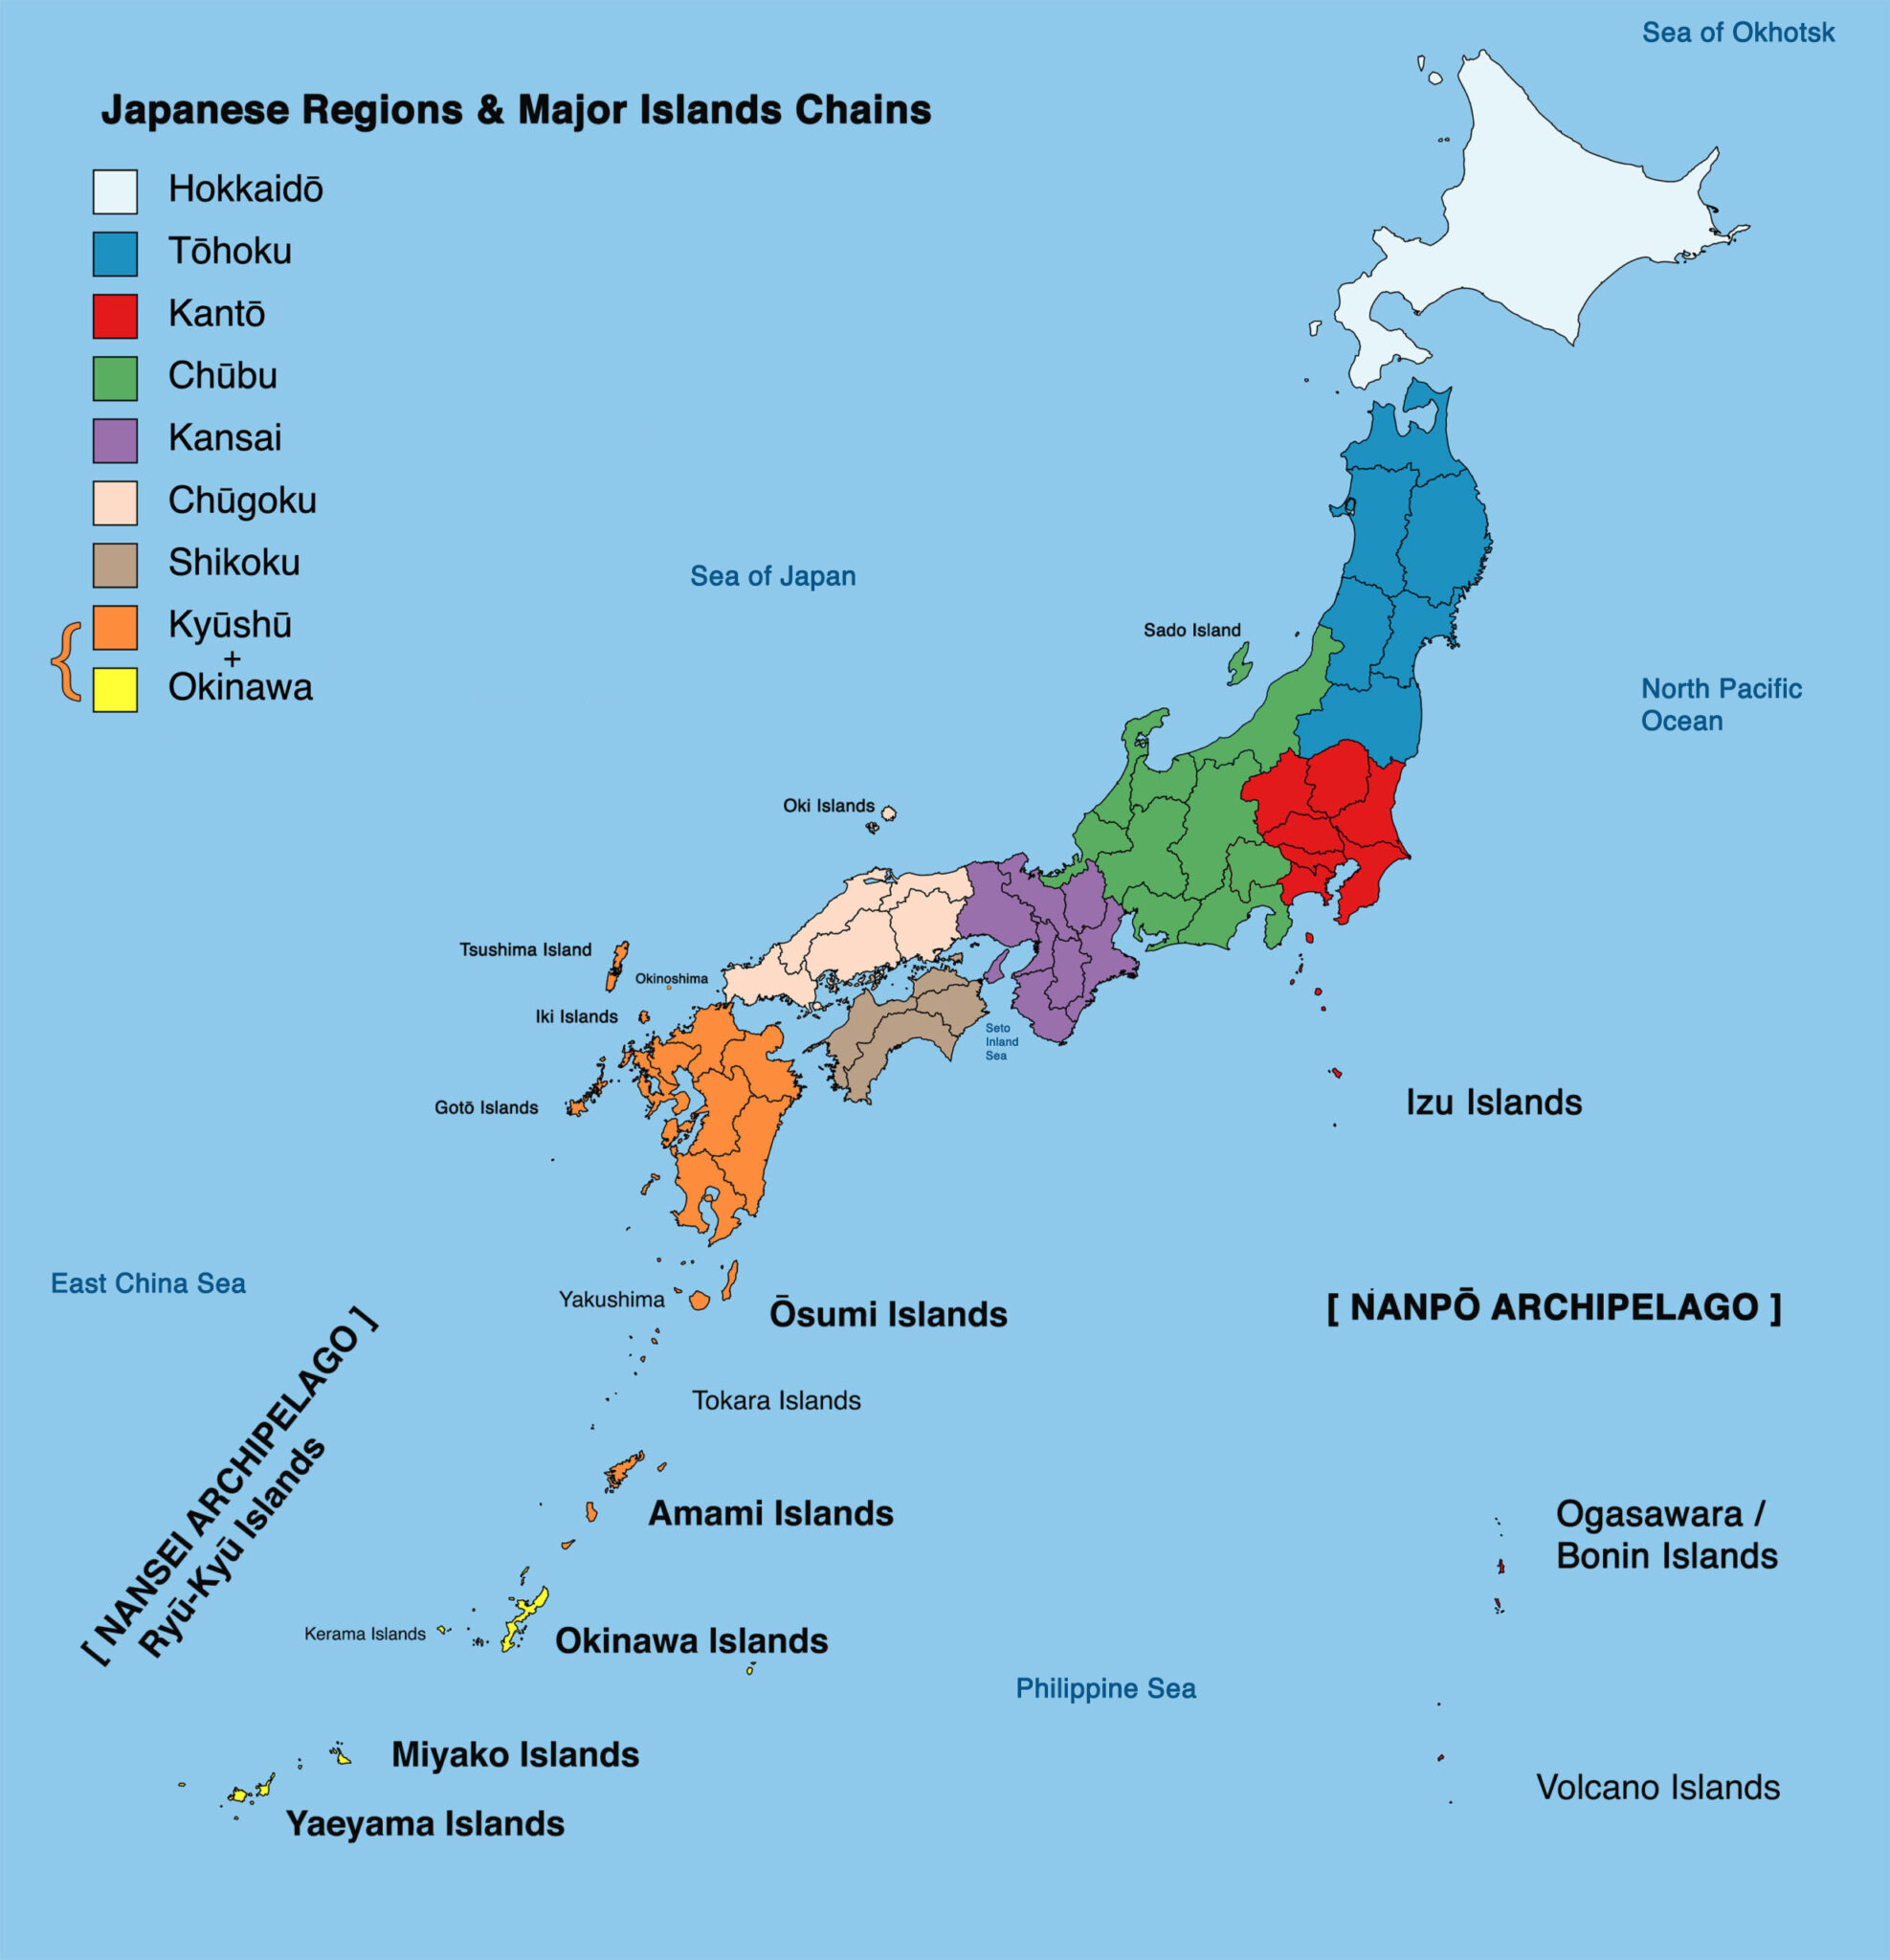 JAPANESE REGIONS AND MAJOR ISLAND CHAINS